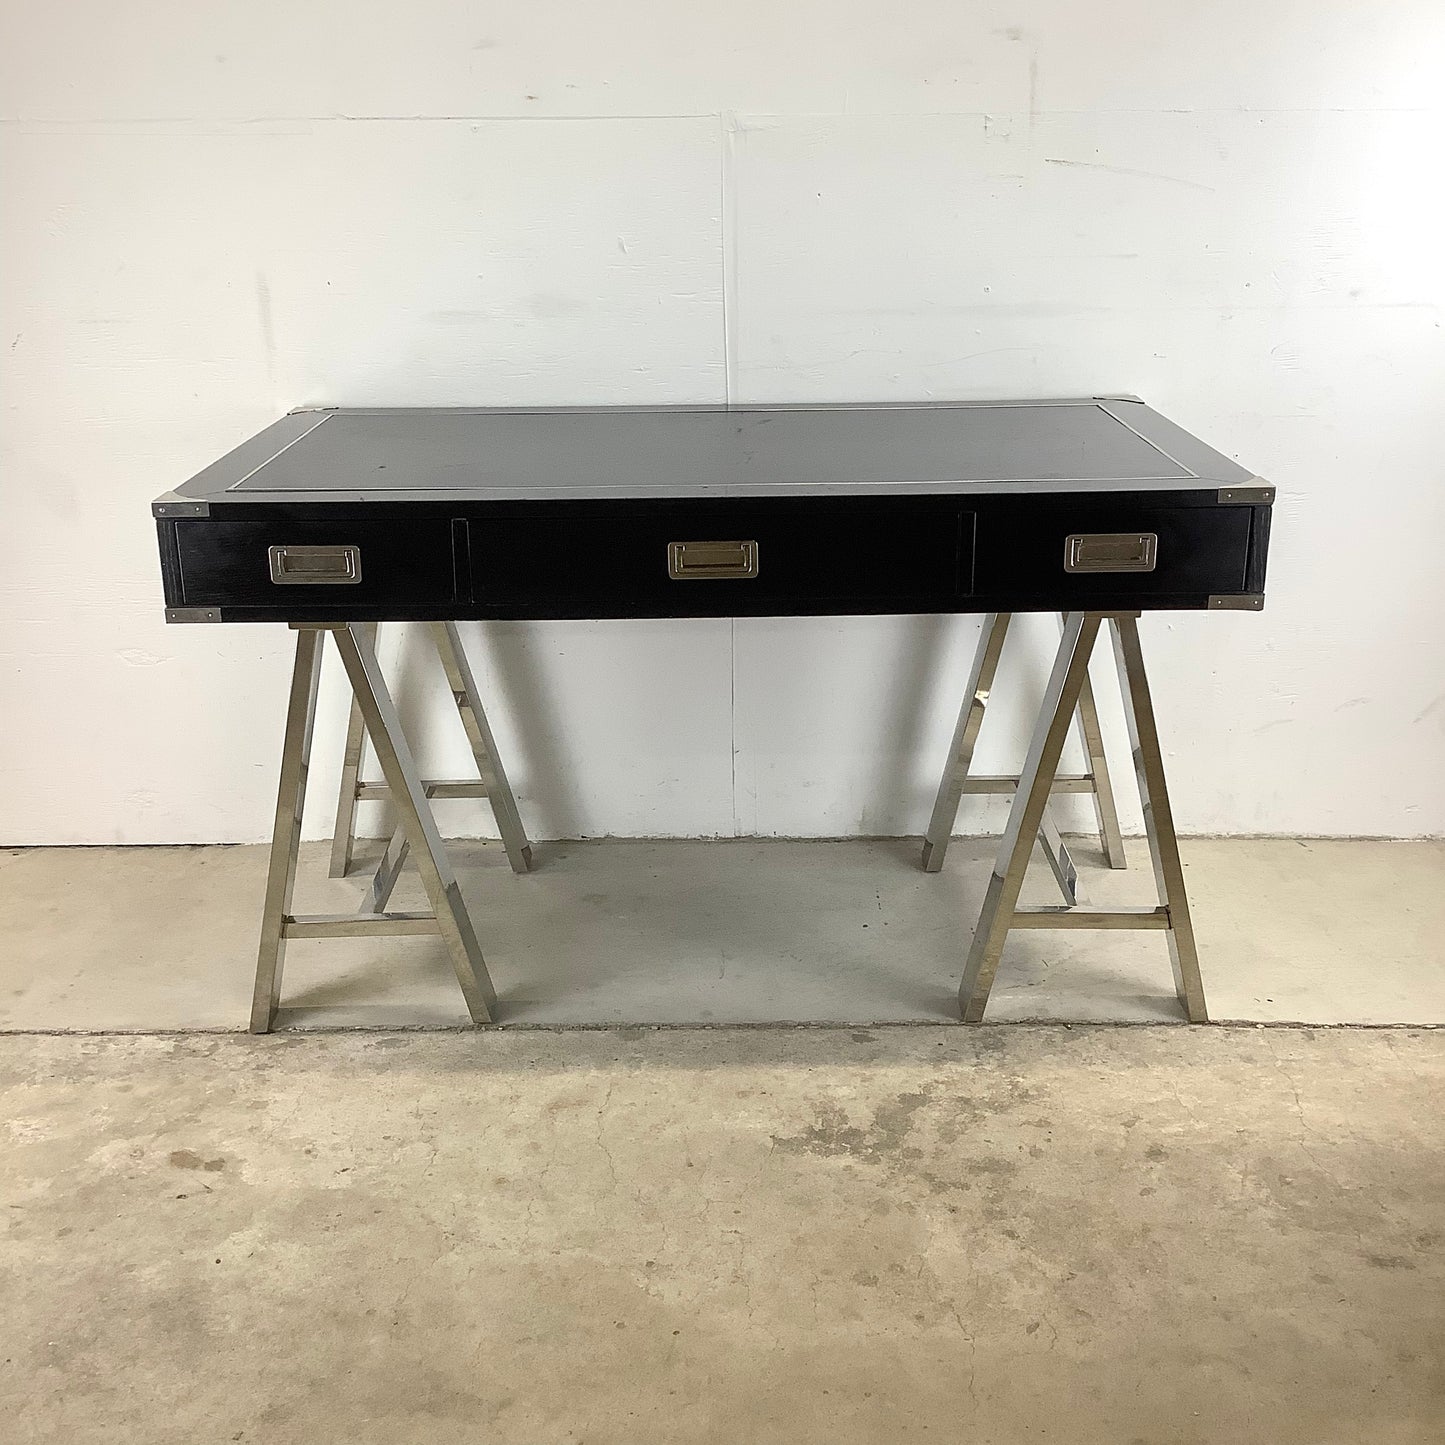 Decorator Modern Campaign Style Writing Desk With Steel Legs